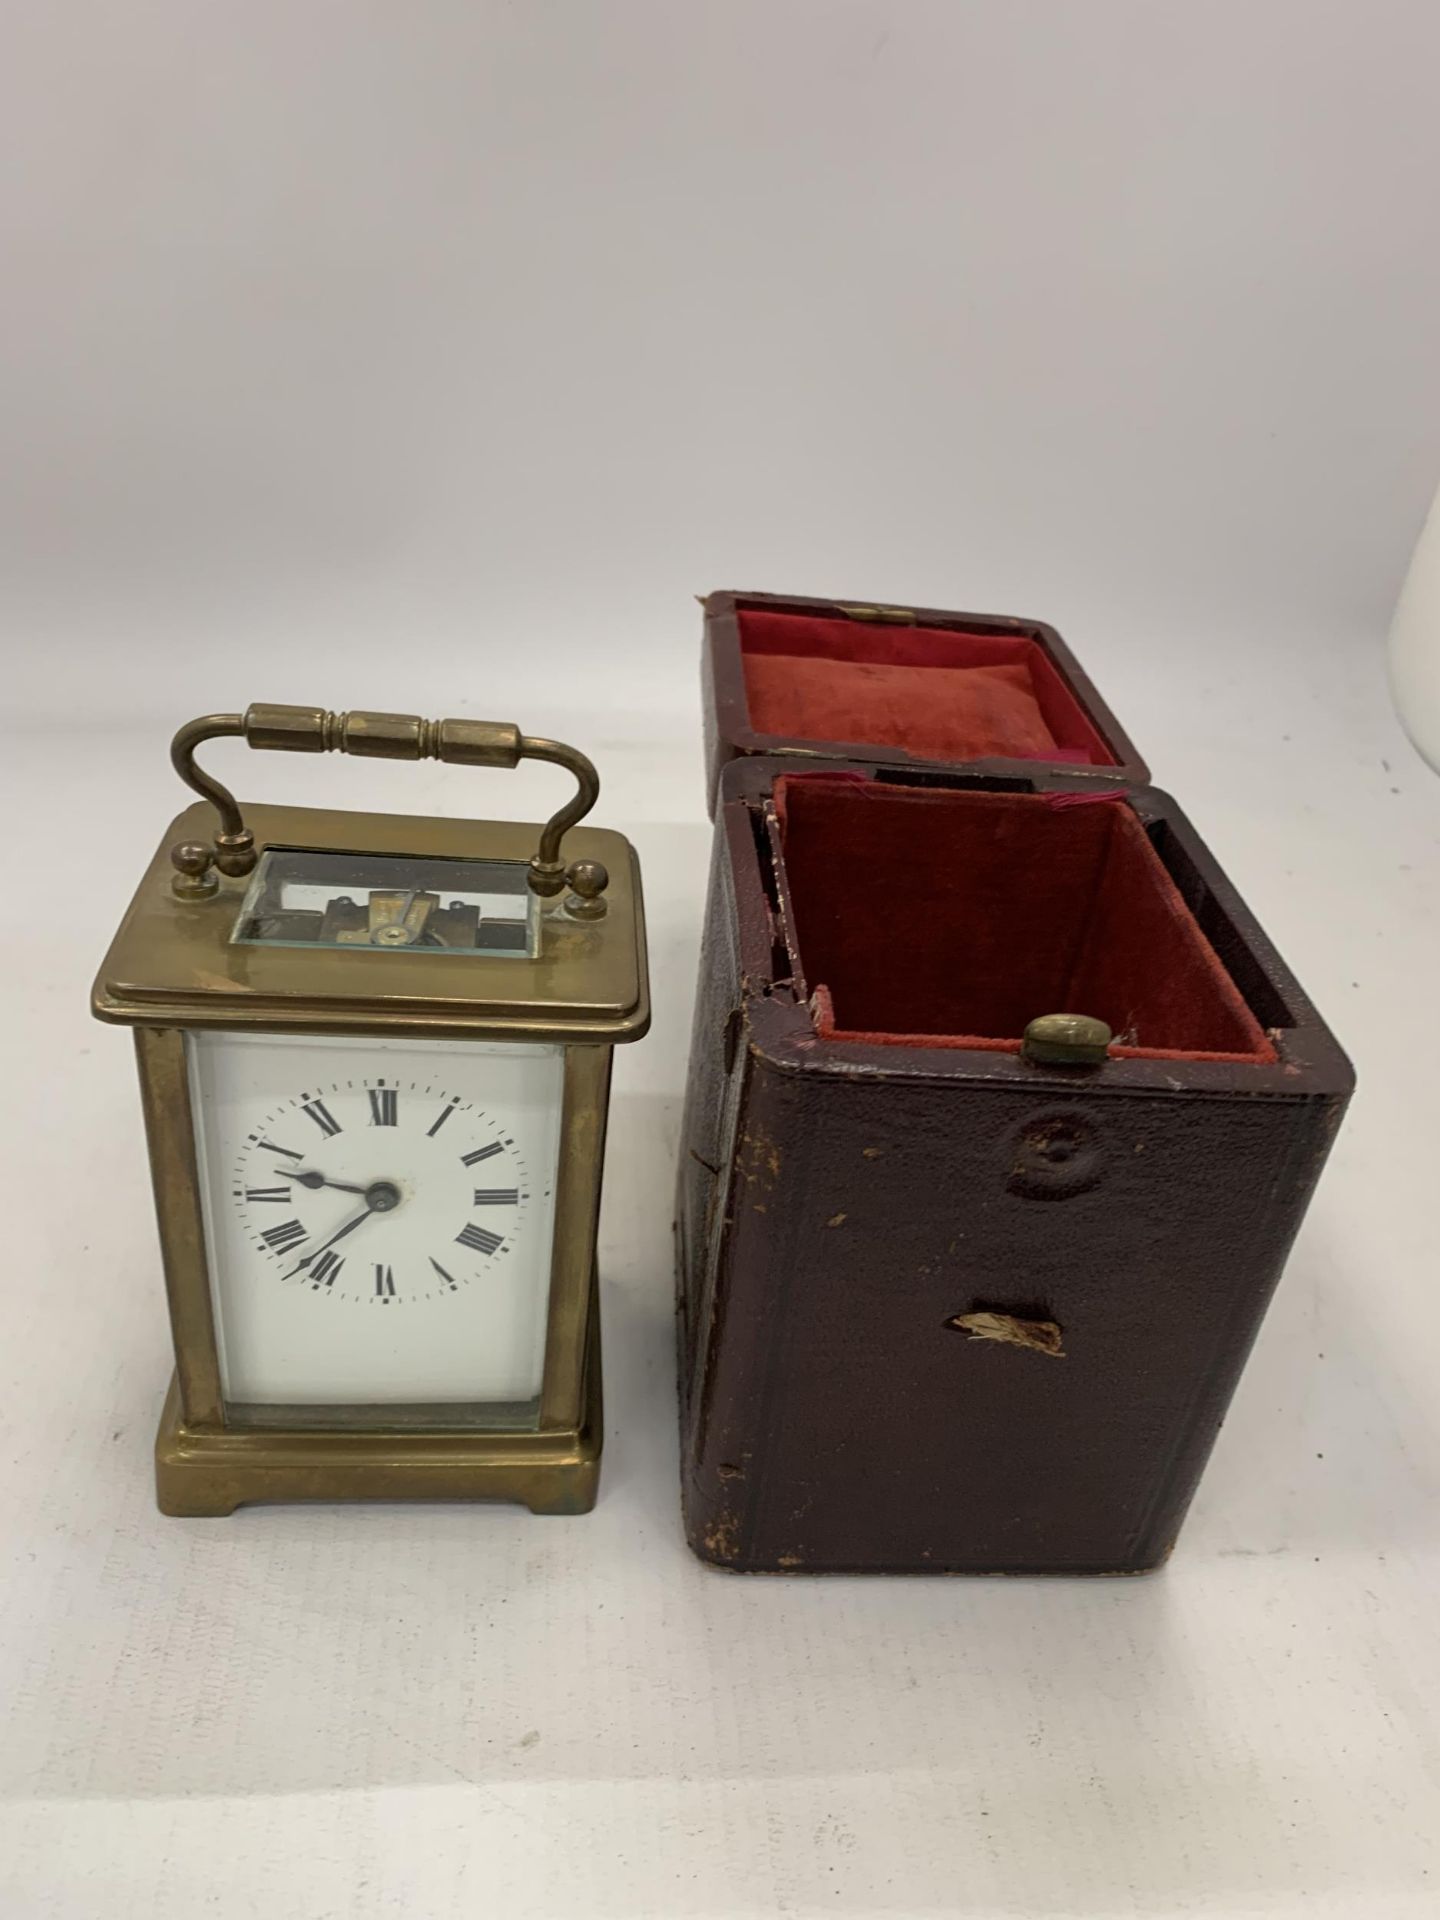 A FRENCH BRASS CASED CARRIAGE CLOCK IN ORIGINAL OUTER CASE WITH KEY